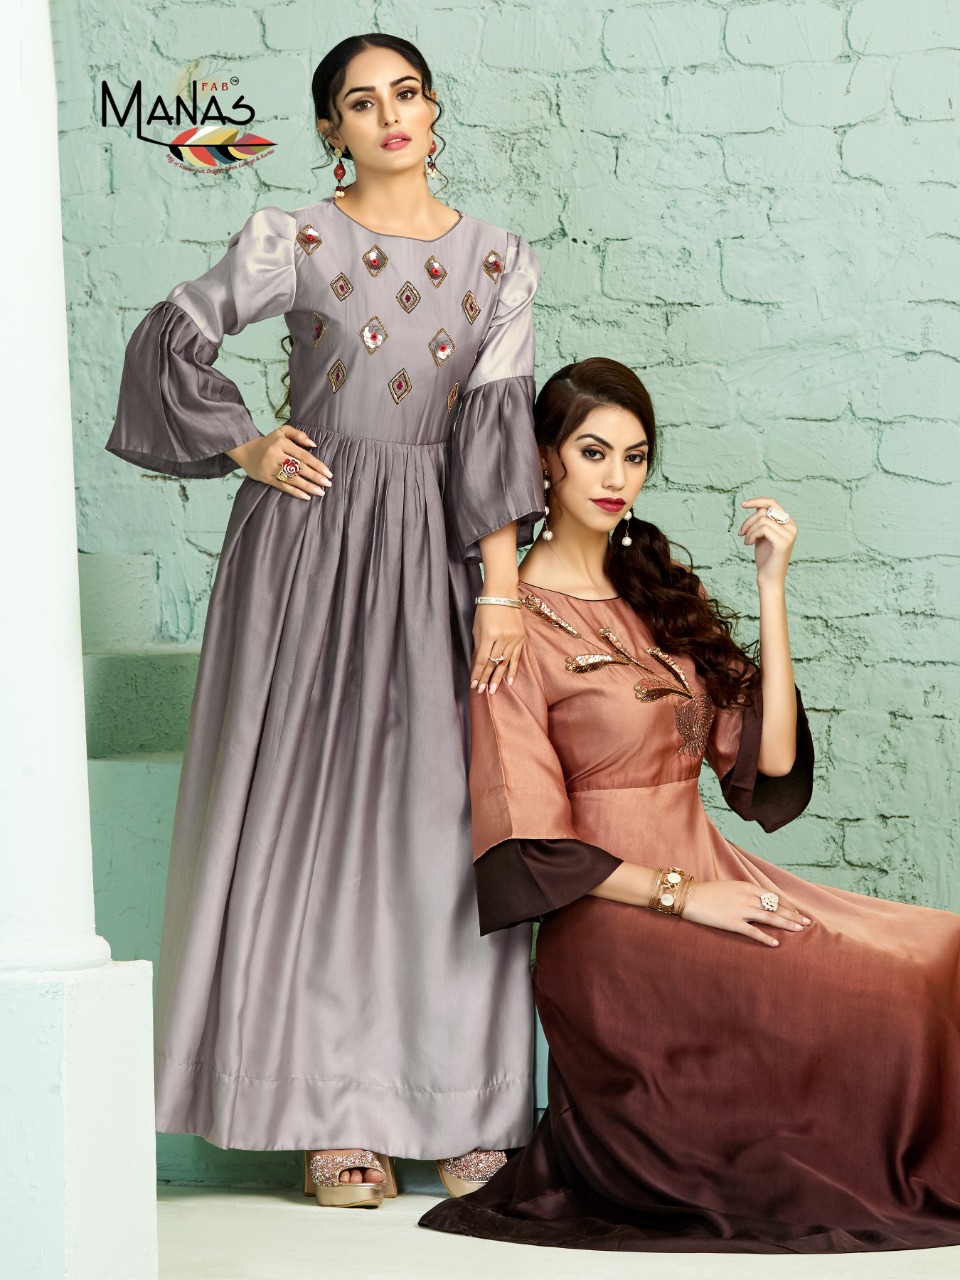 Manas zaira touch the feel of trendy fits Gowns in wholesale prices